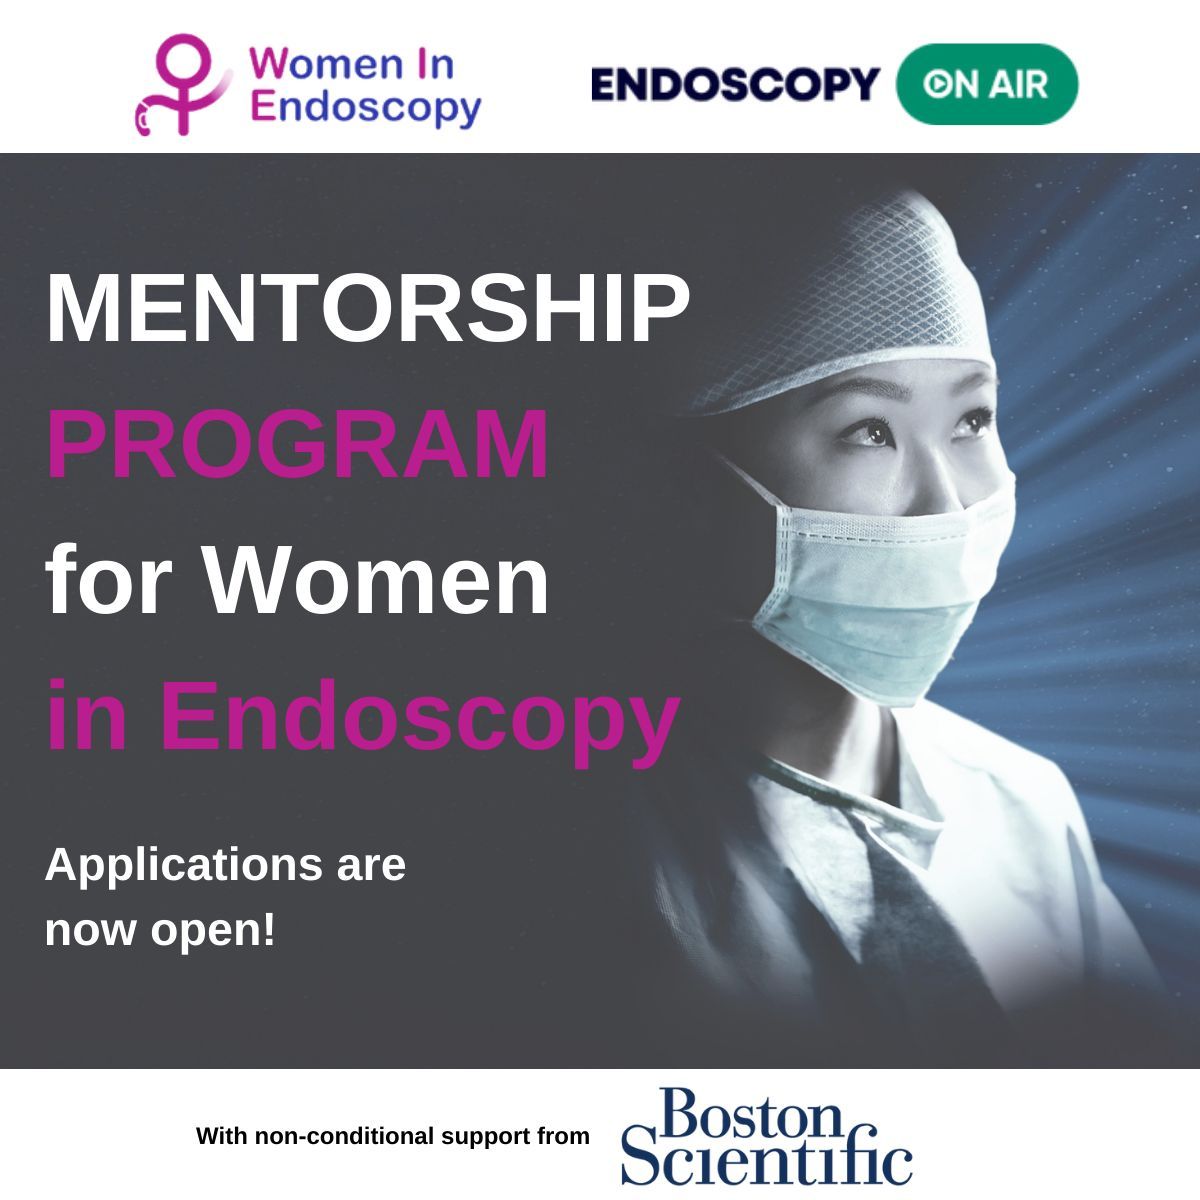 We are excited to share that WIE and Endoscopy on Air have partnered with Boston Scientific to unveil a first-of-its-kind mentorship program! Learn more about the program + submit your application today: buff.ly/49LjX4S #womeninendo #endoscopy @EndoscopyOA @bostonsci